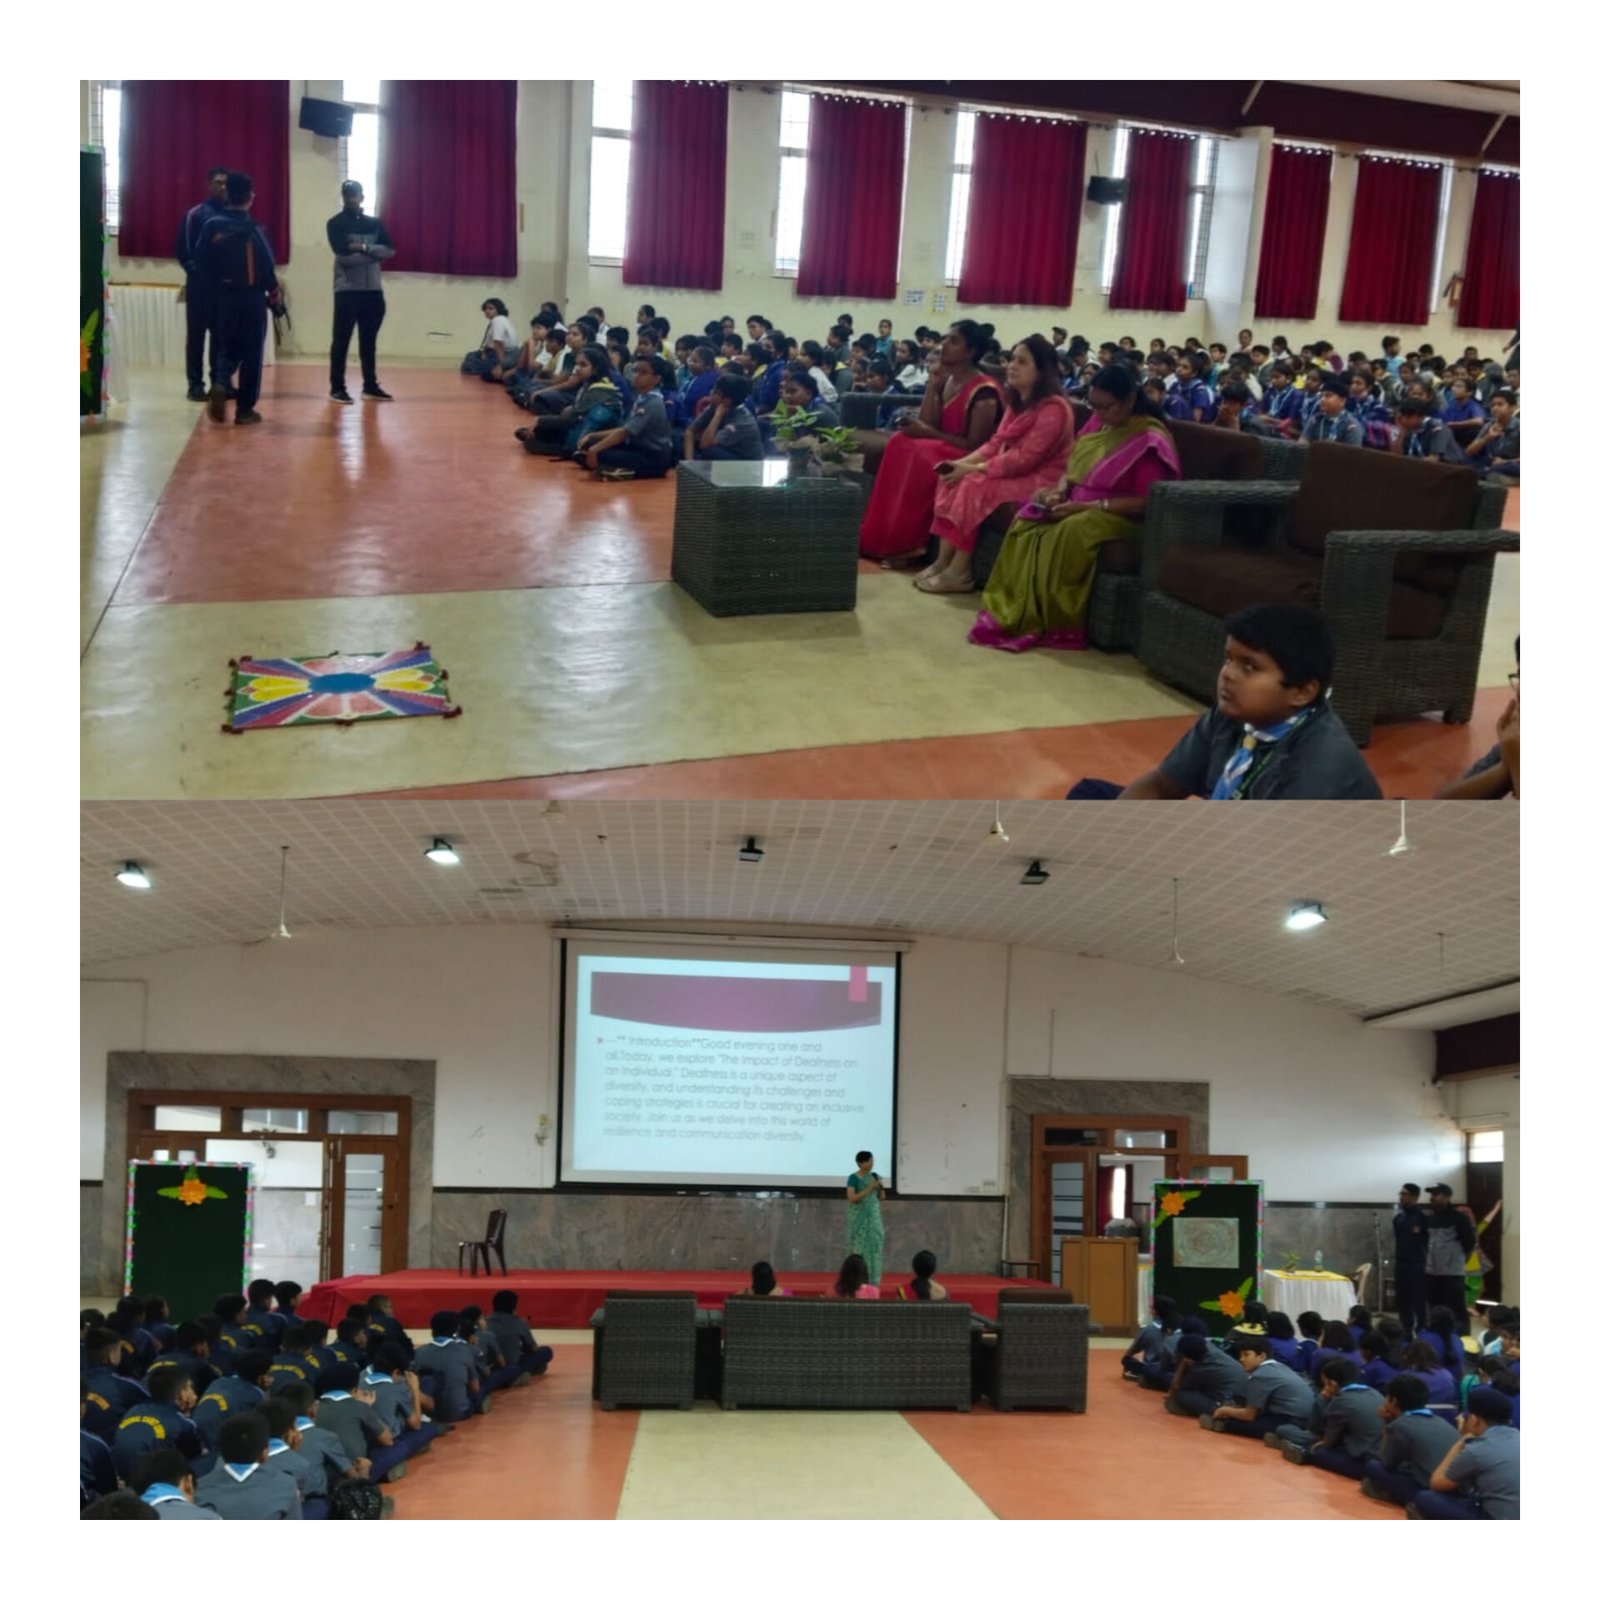 You are currently viewing On “Impact of Deafness in Early Childhood” A talk was given to students of Delhi Public School by Ms.Radhika Poovyya and Ms.Cathy Charles